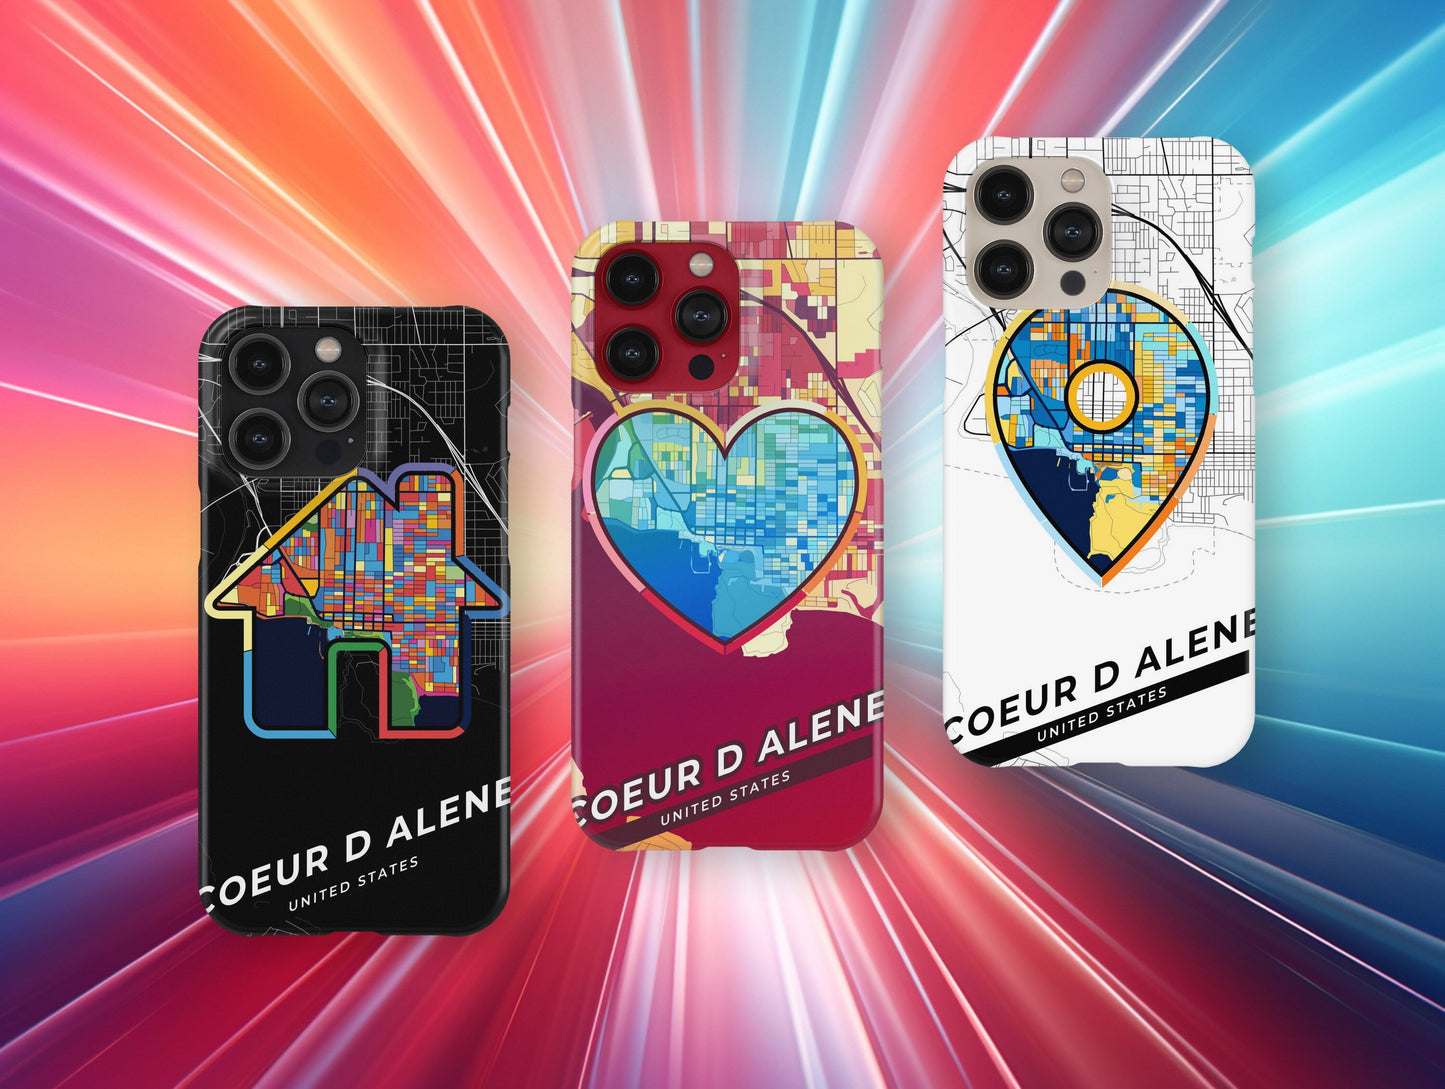 Coeur D Alene Idaho slim phone case with colorful icon. Birthday, wedding or housewarming gift. Couple match cases.